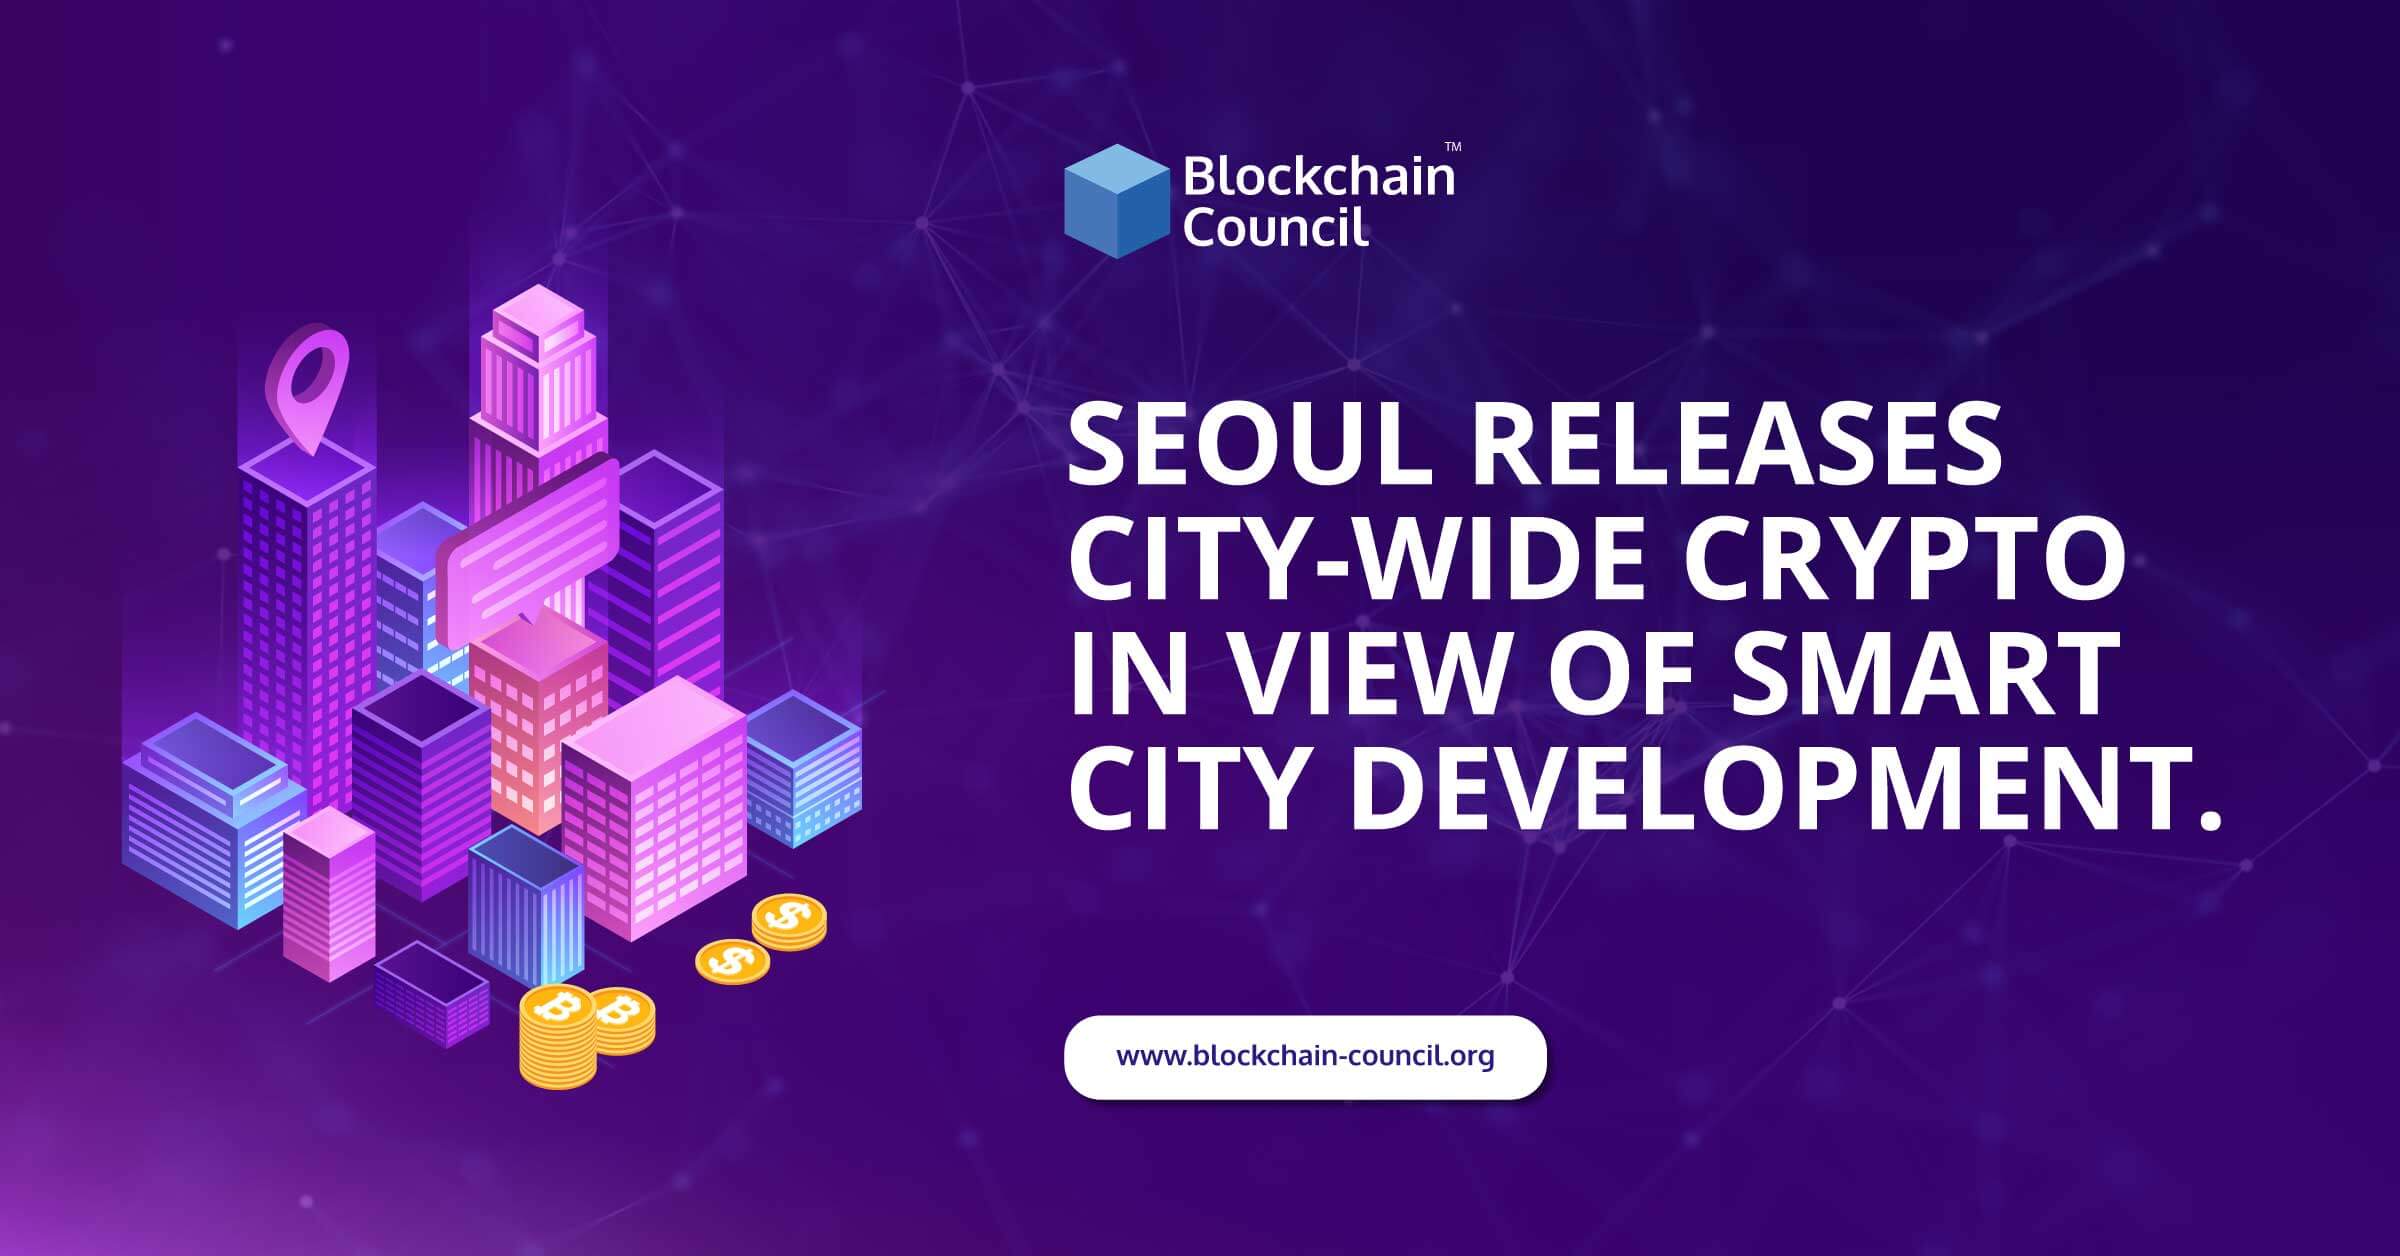 Seoul-Releases-City-Wide-Crypto-in-View-of-Smart-City-Development